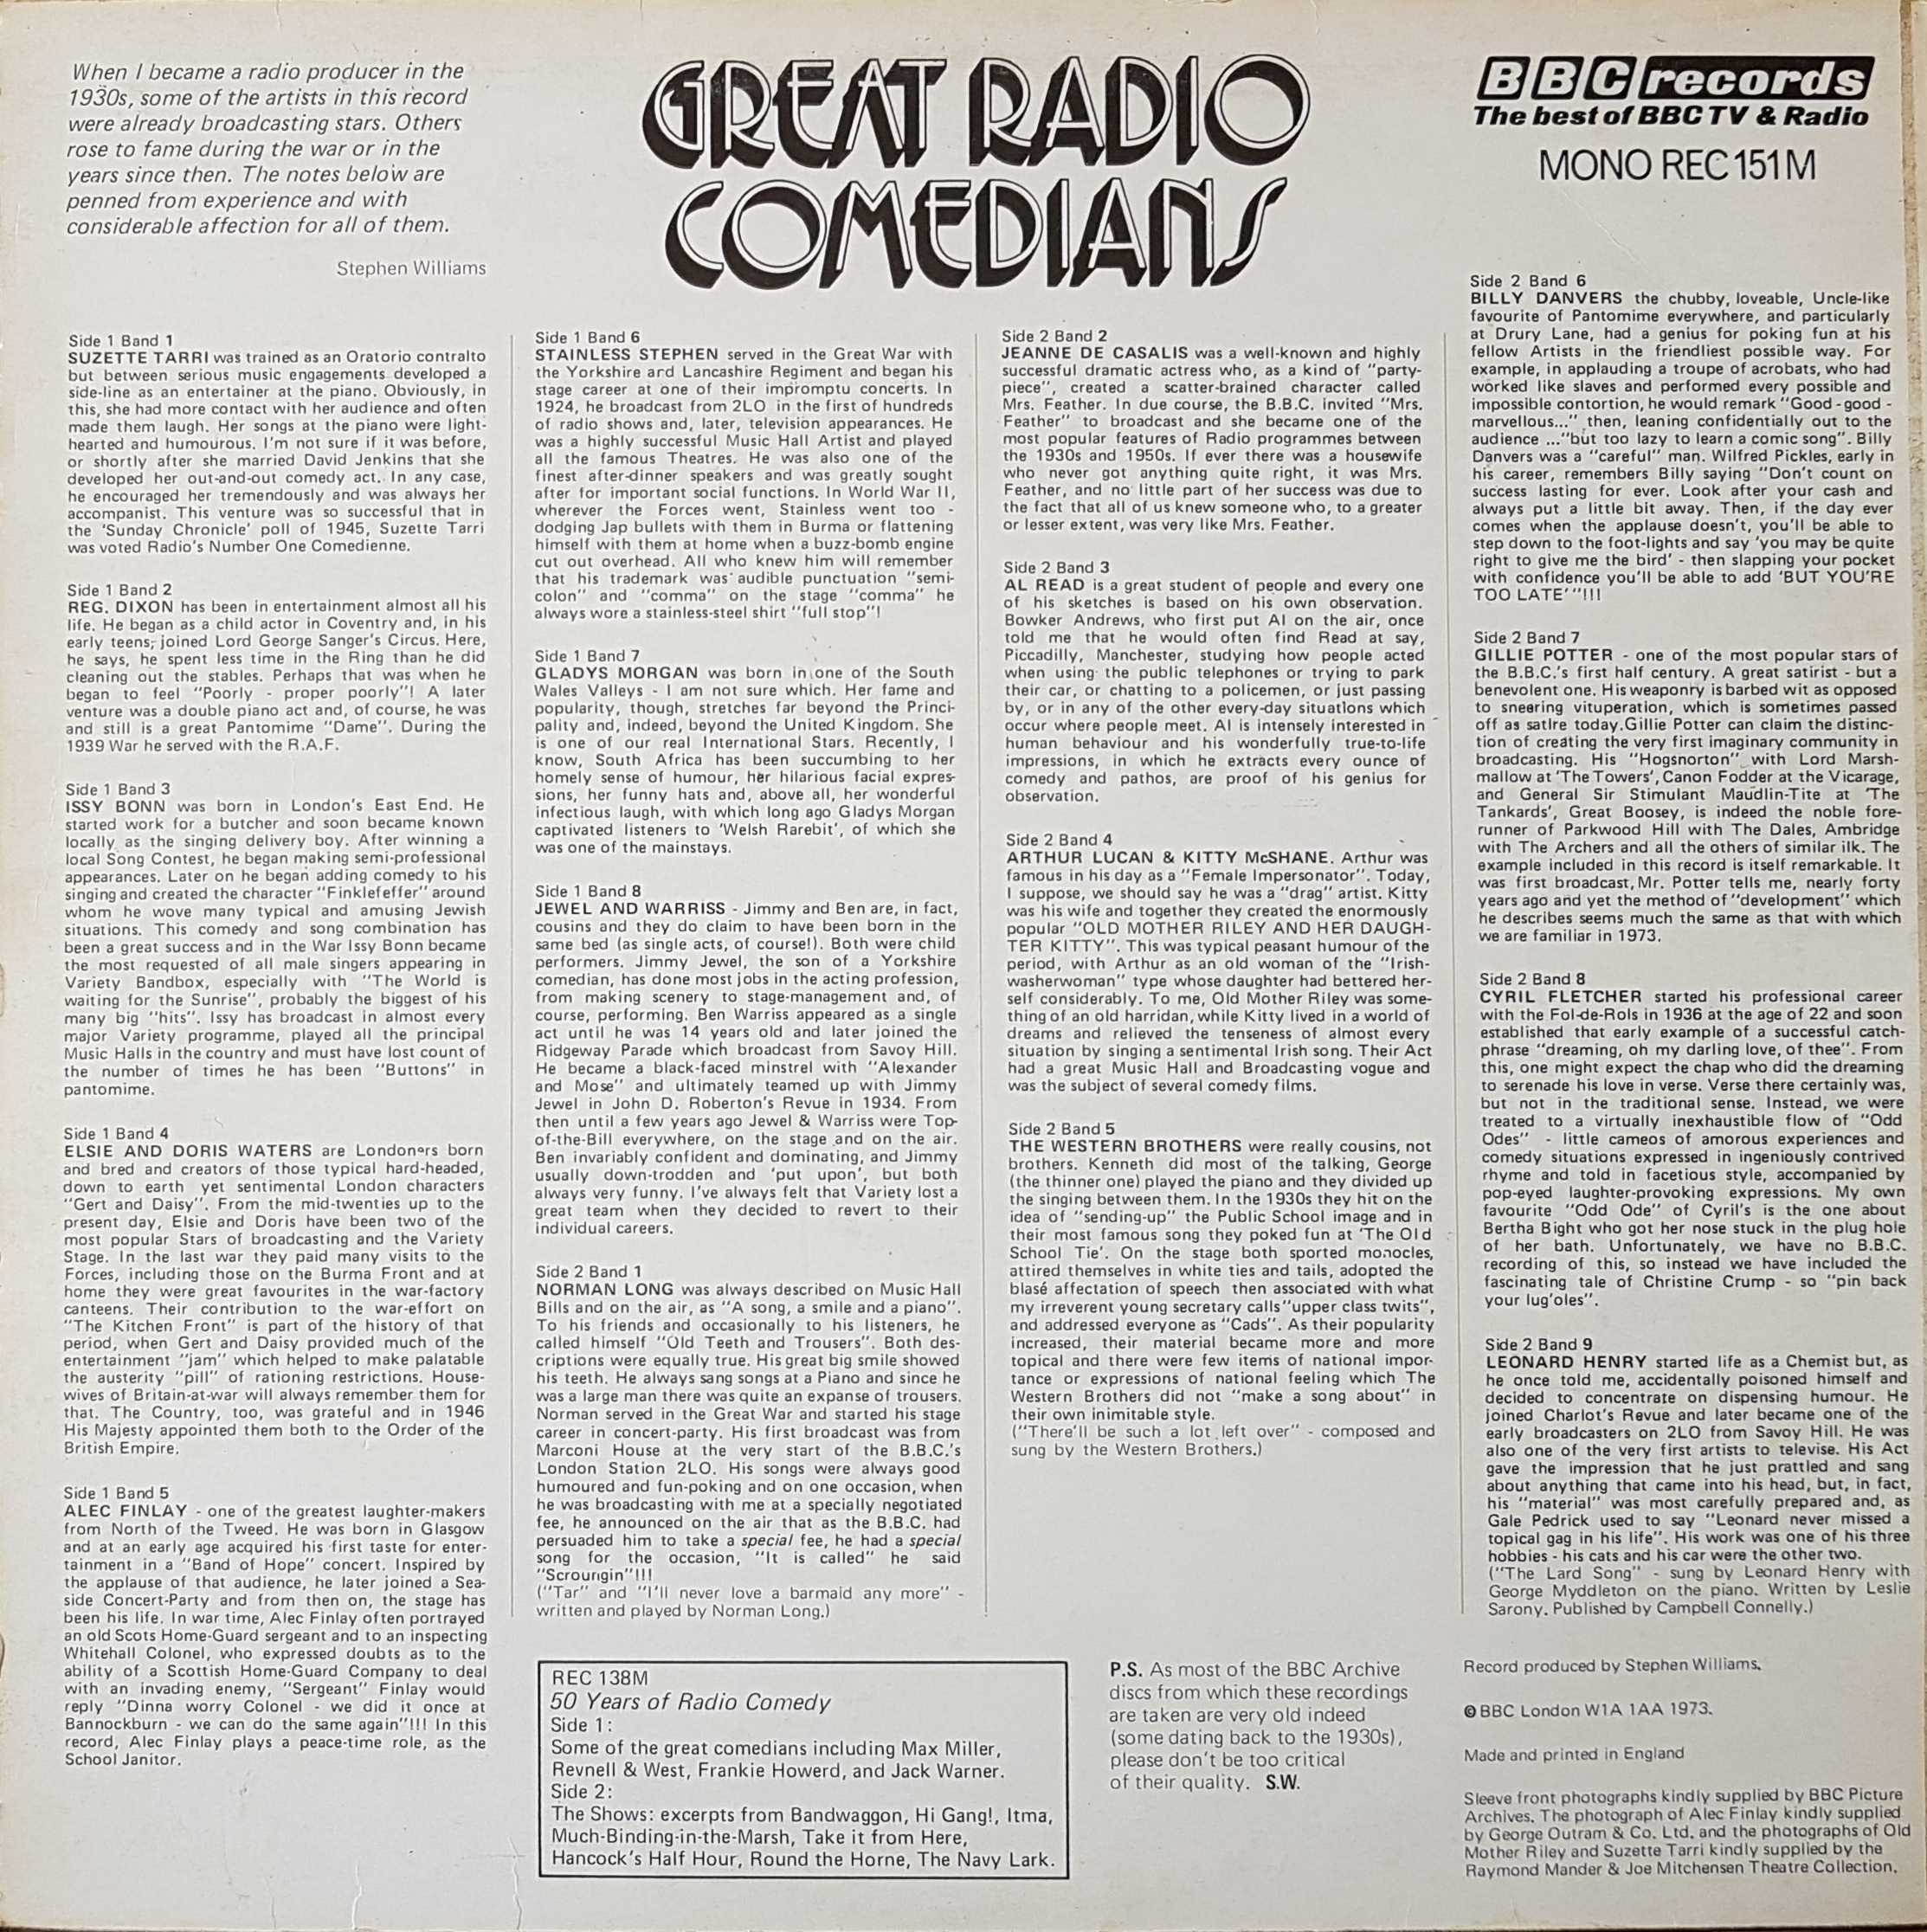 Picture of REC 151 Great radio comedians by artist Various from the BBC records and Tapes library